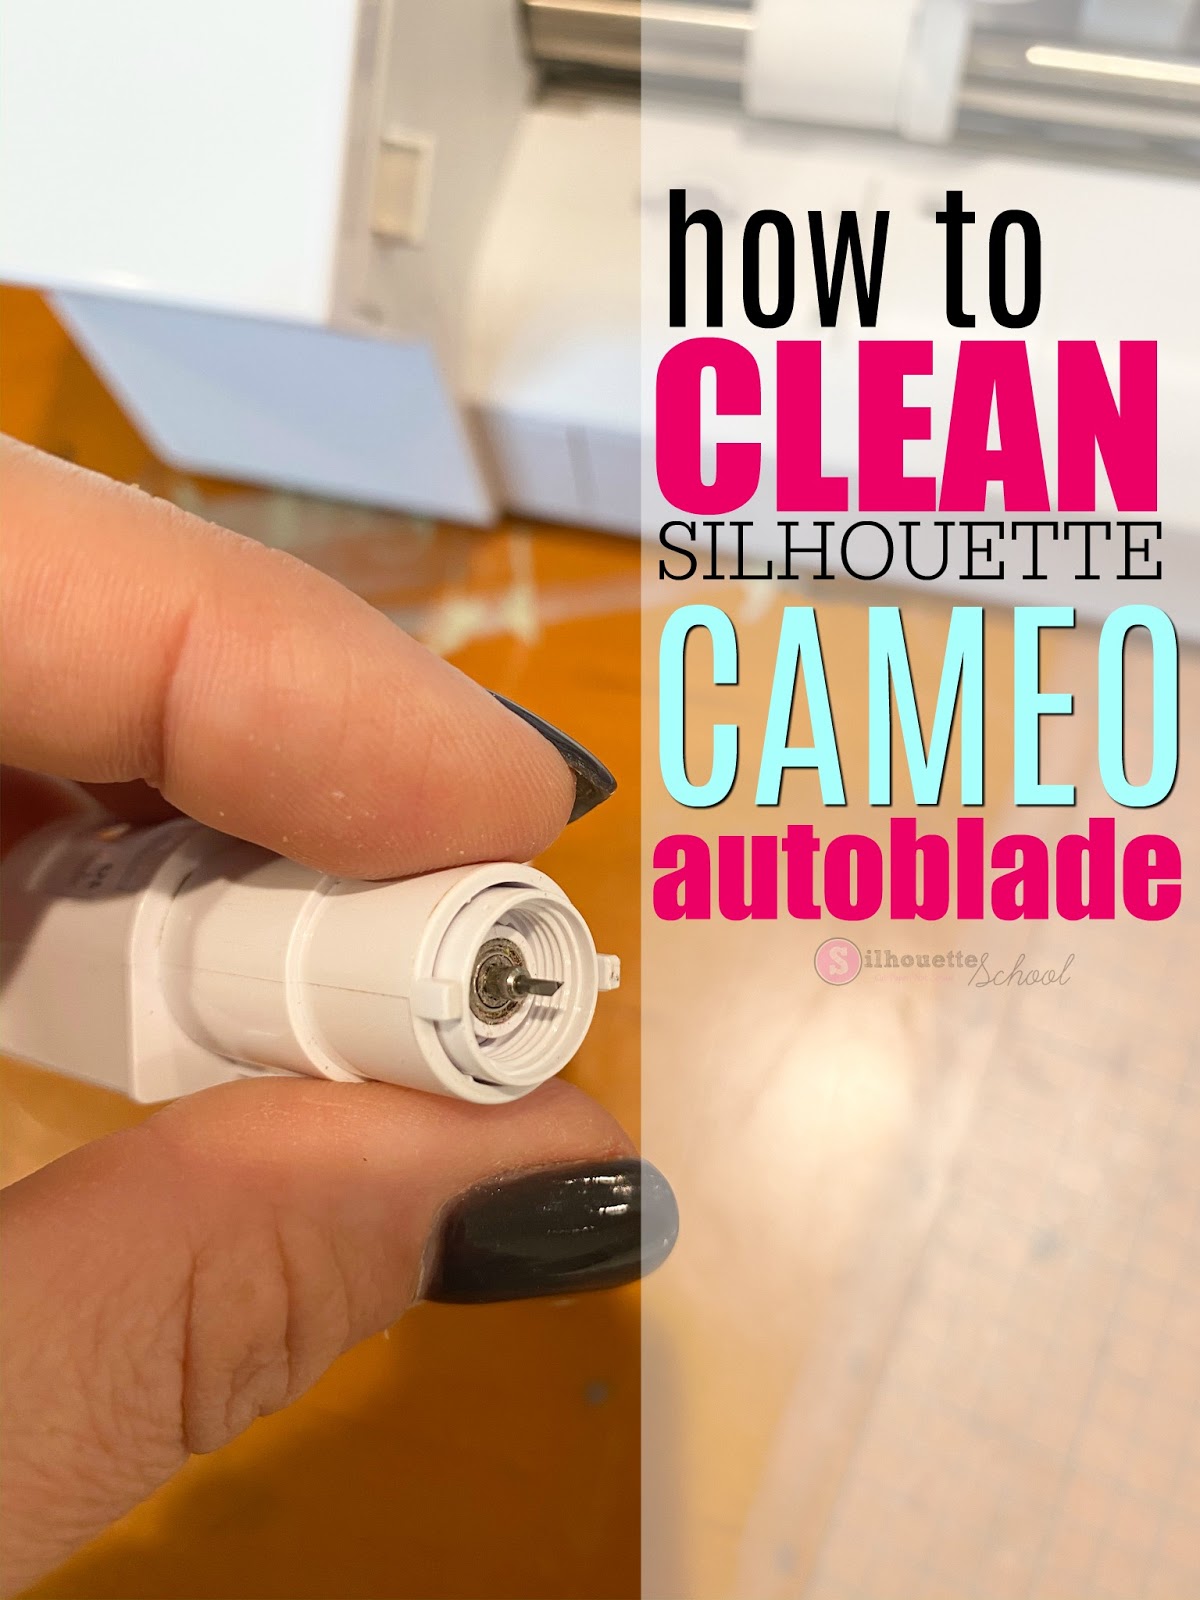 Silhouette CAMEO 4 Blade Not Cutting? How to Clean It - Silhouette School